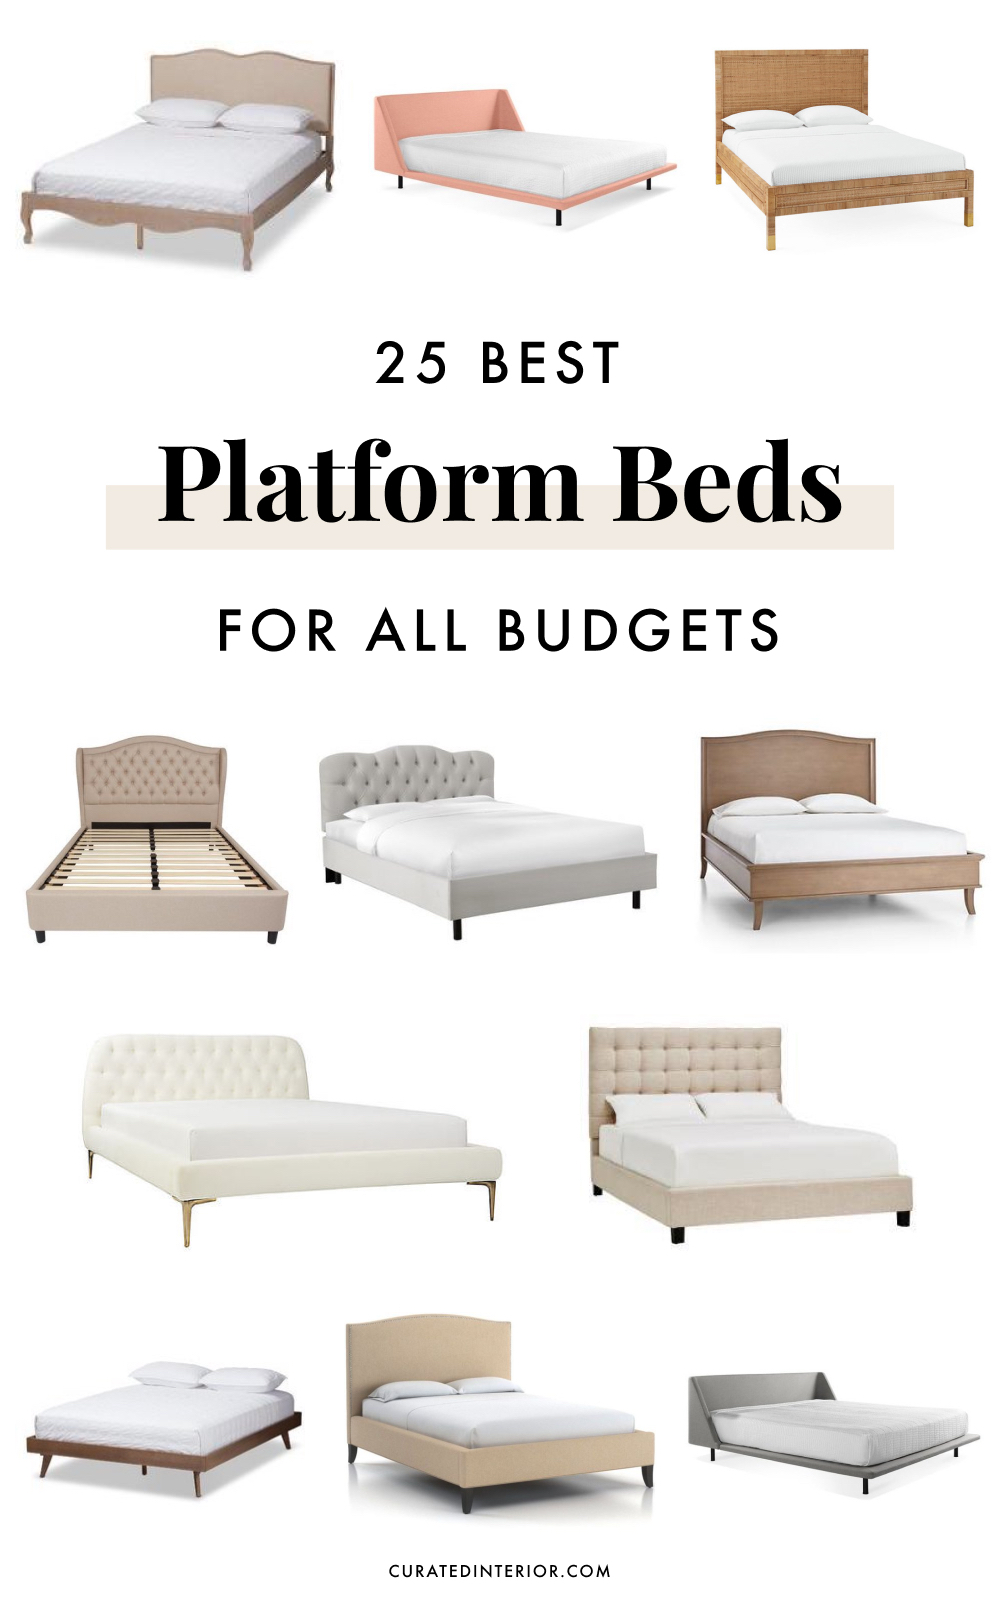 25 Perfect Platform Beds for all Budgets for Your Bedroom